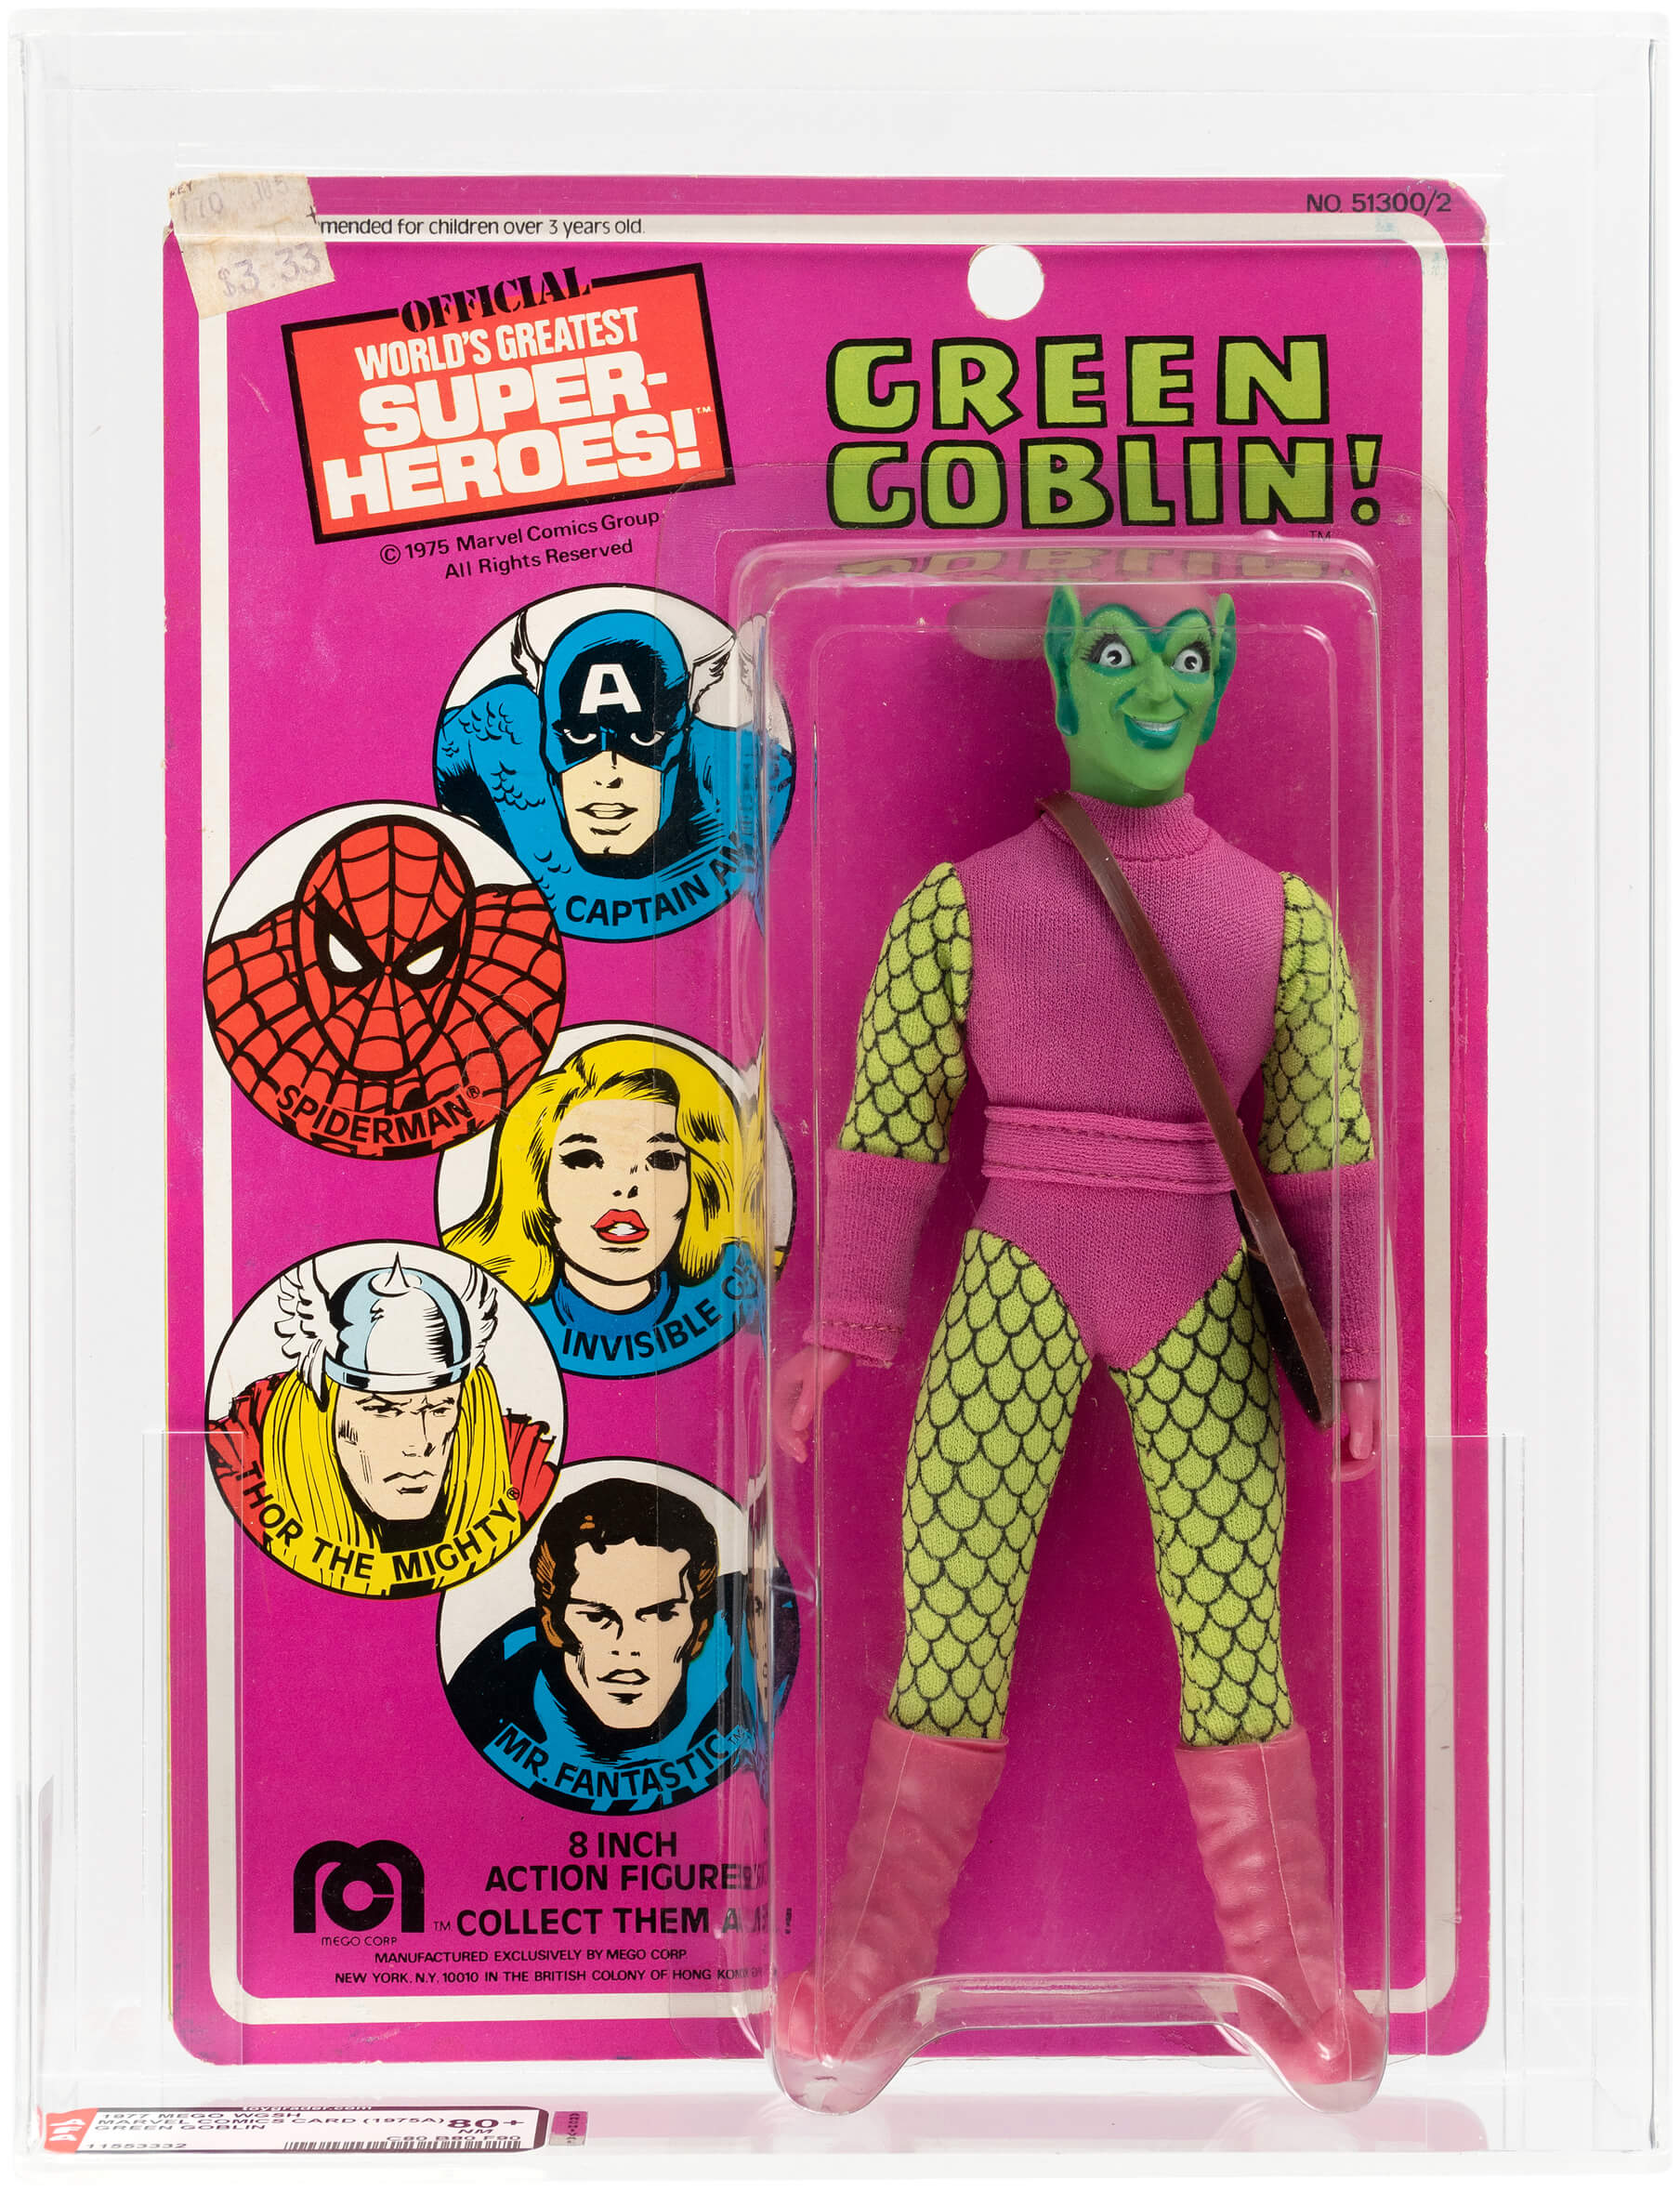 Green Goblin 8-in action figure from Mego’s The World’s Greatest Super-Heroes line. Issued in 1977, AFA-graded 80+ NM, archival case. Only graded example in AFA Population Report. Est. $10,000-$20,000. Image courtesy of Hake’s Auctions